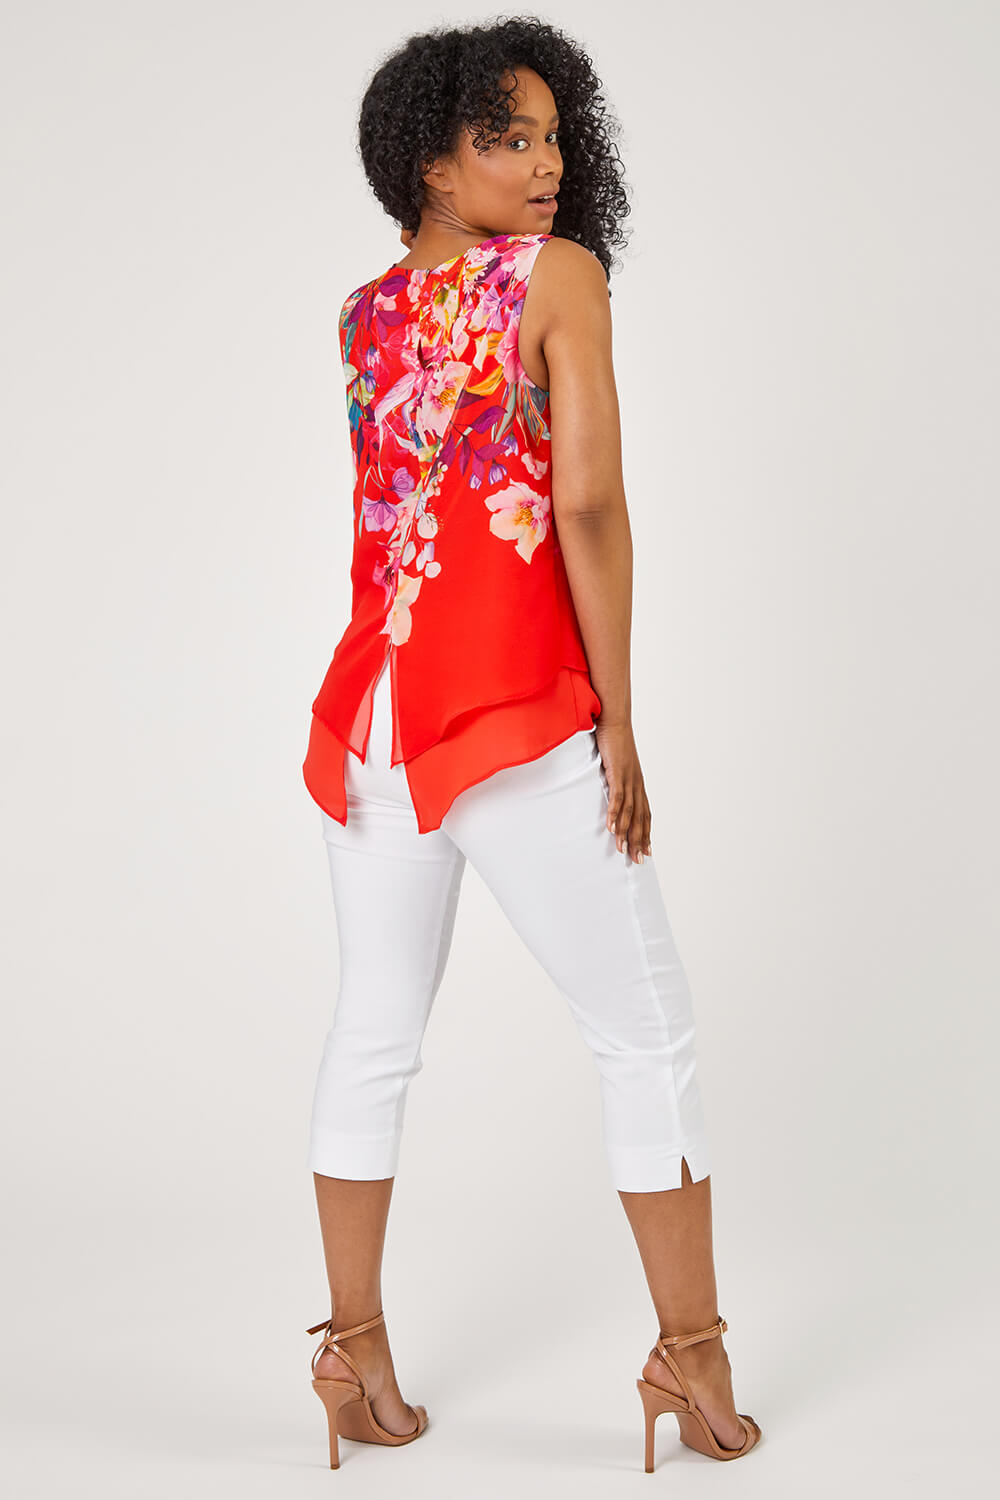 Red Petite Floral Print Chiffon Overlay Top, Image 2 of 5